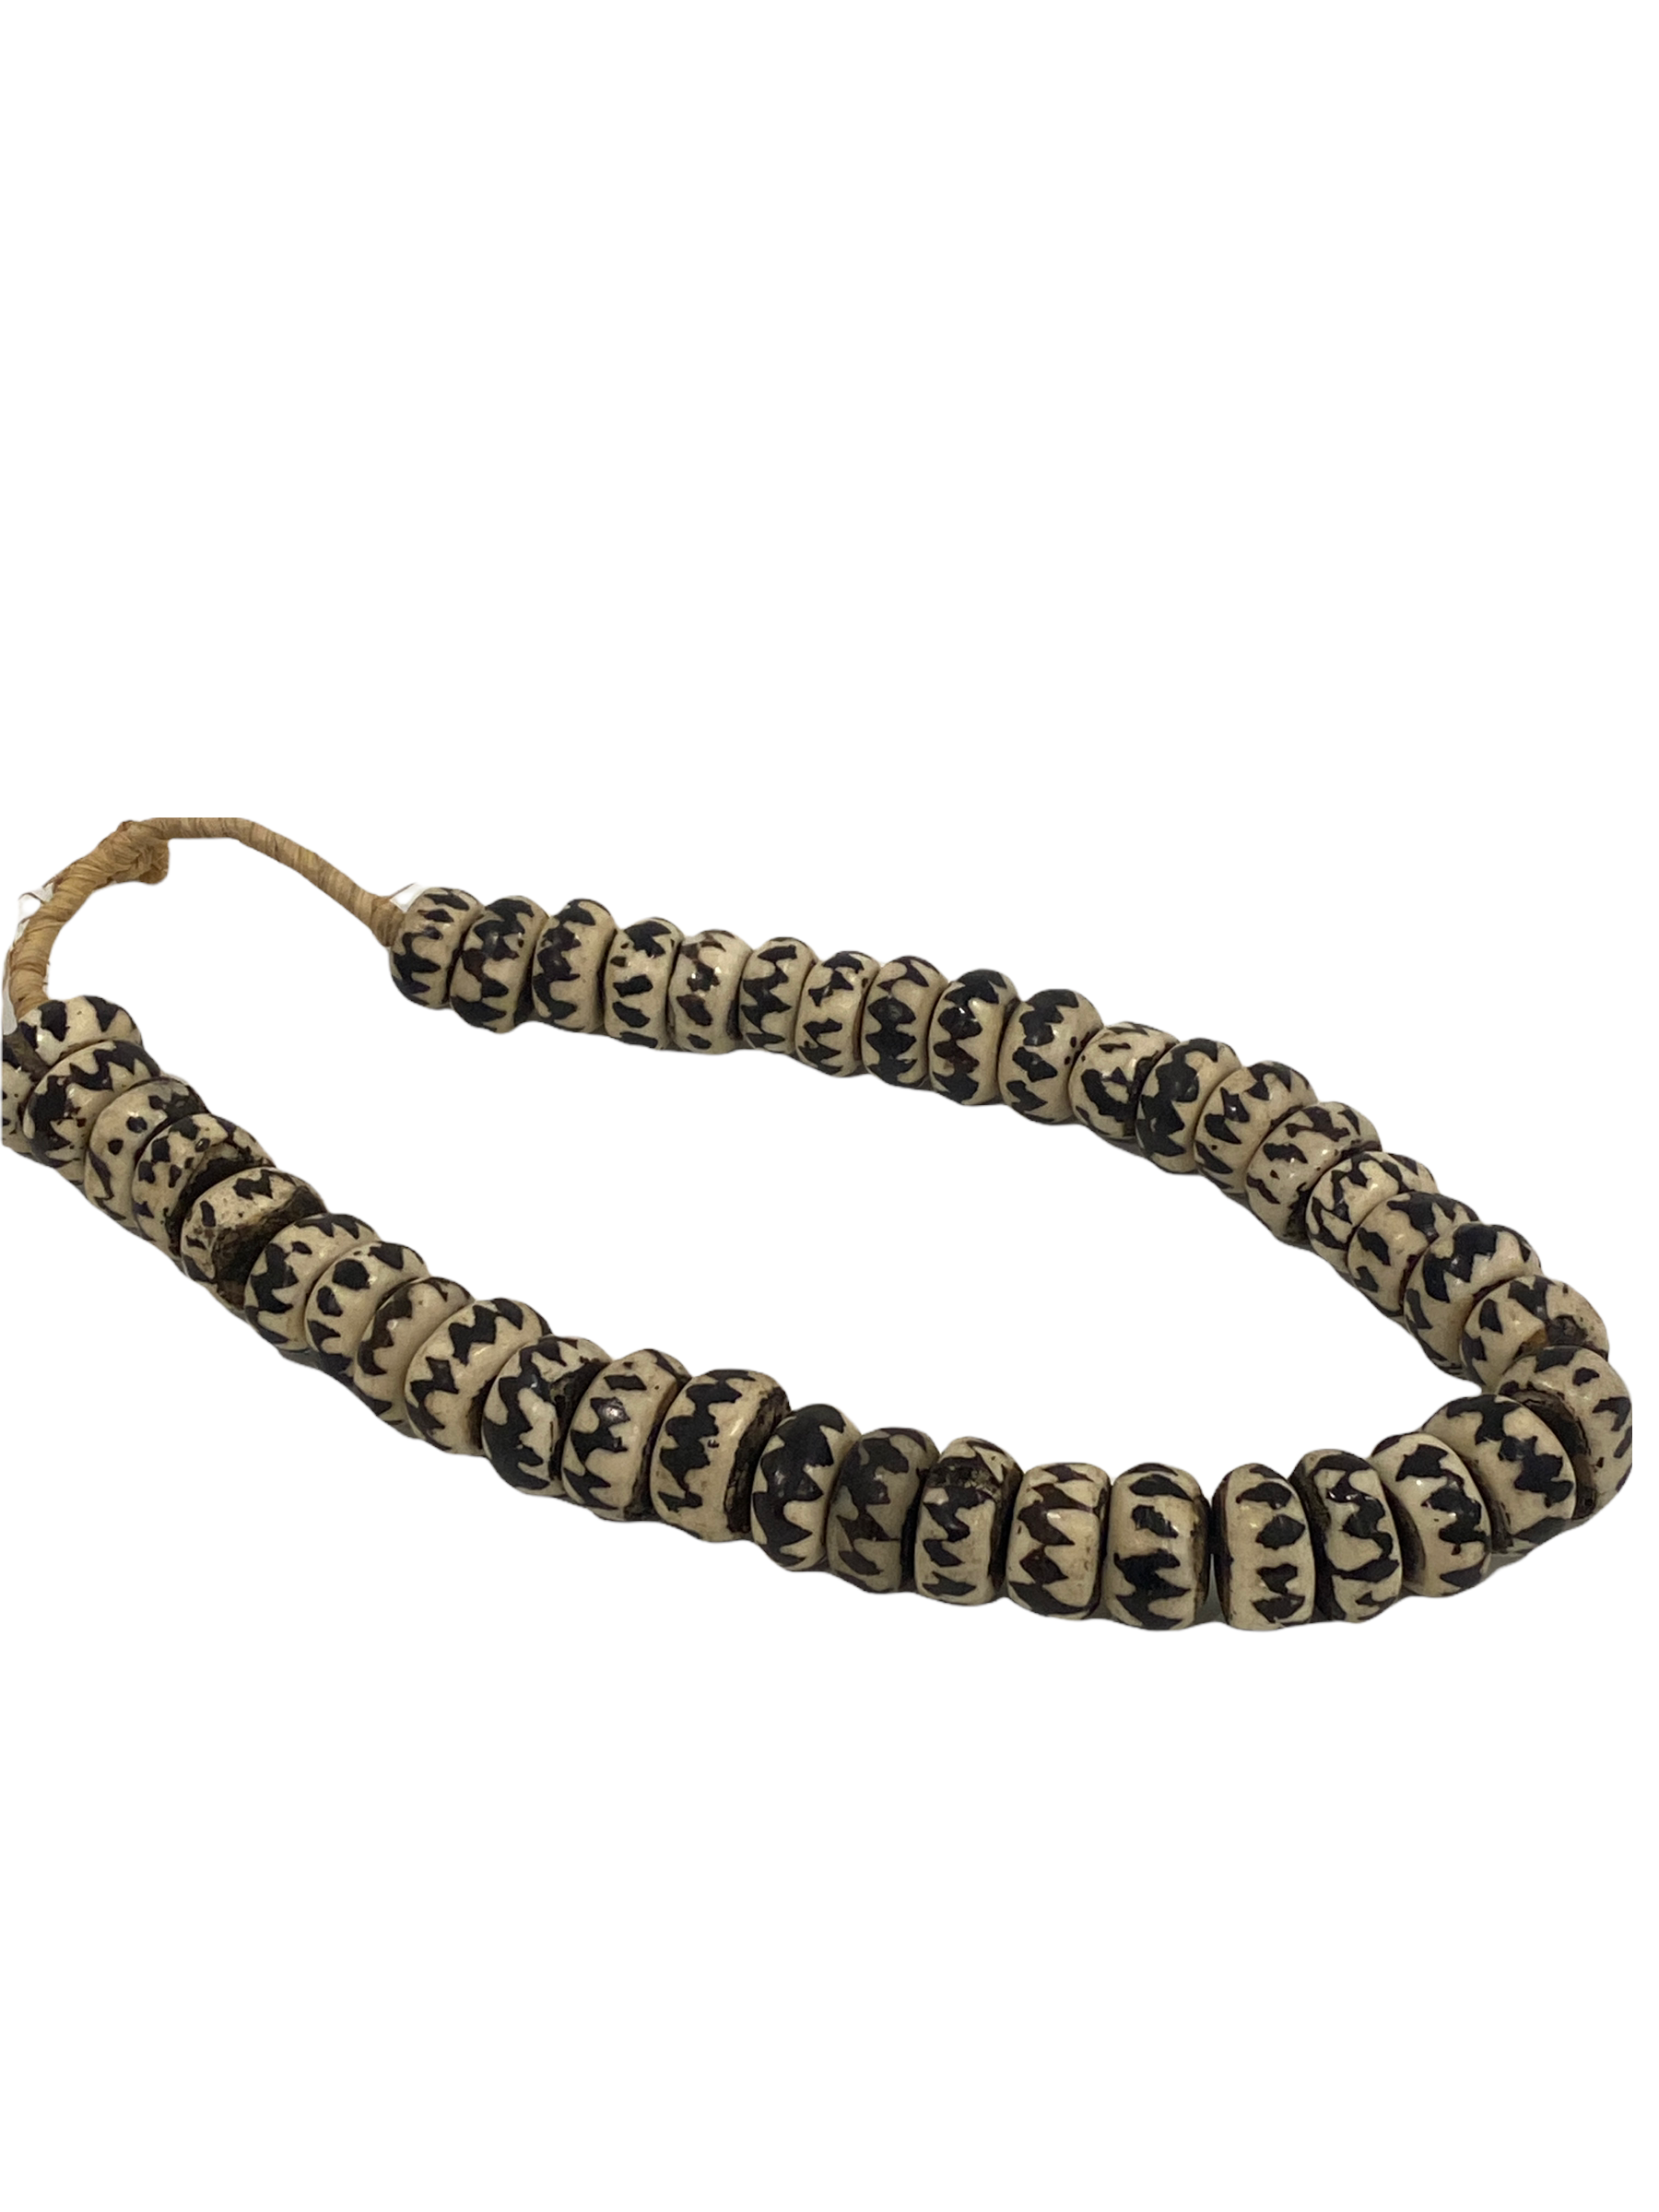 Kenya Beads Necklace - Disc shaped brown/white (47.1)